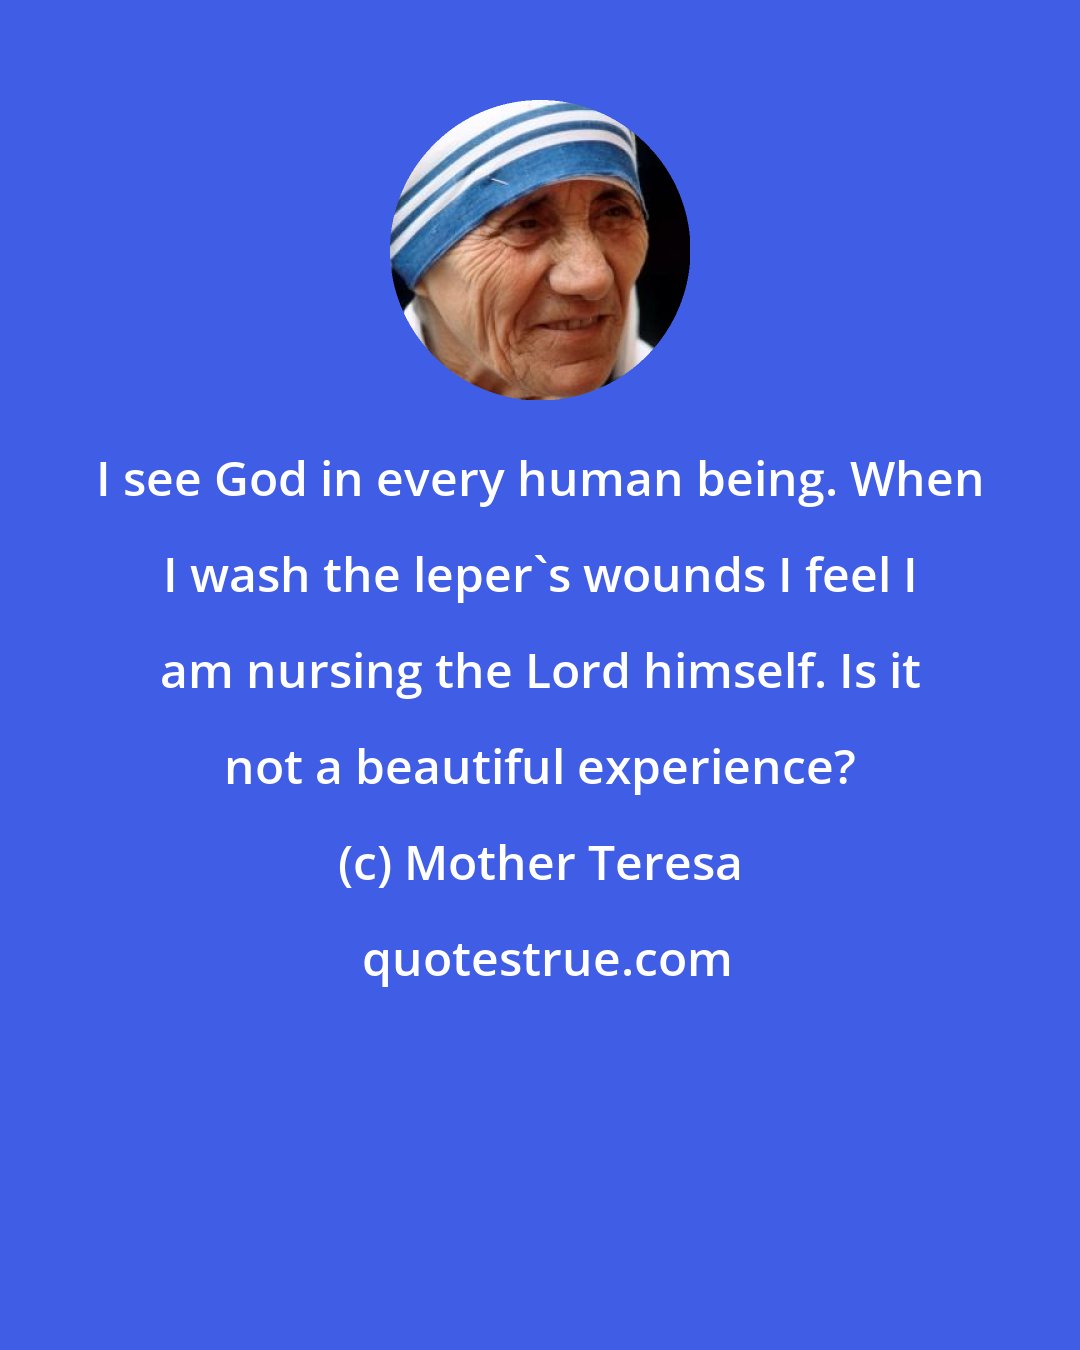 Mother Teresa: I see God in every human being. When I wash the leper's wounds I feel I am nursing the Lord himself. Is it not a beautiful experience?